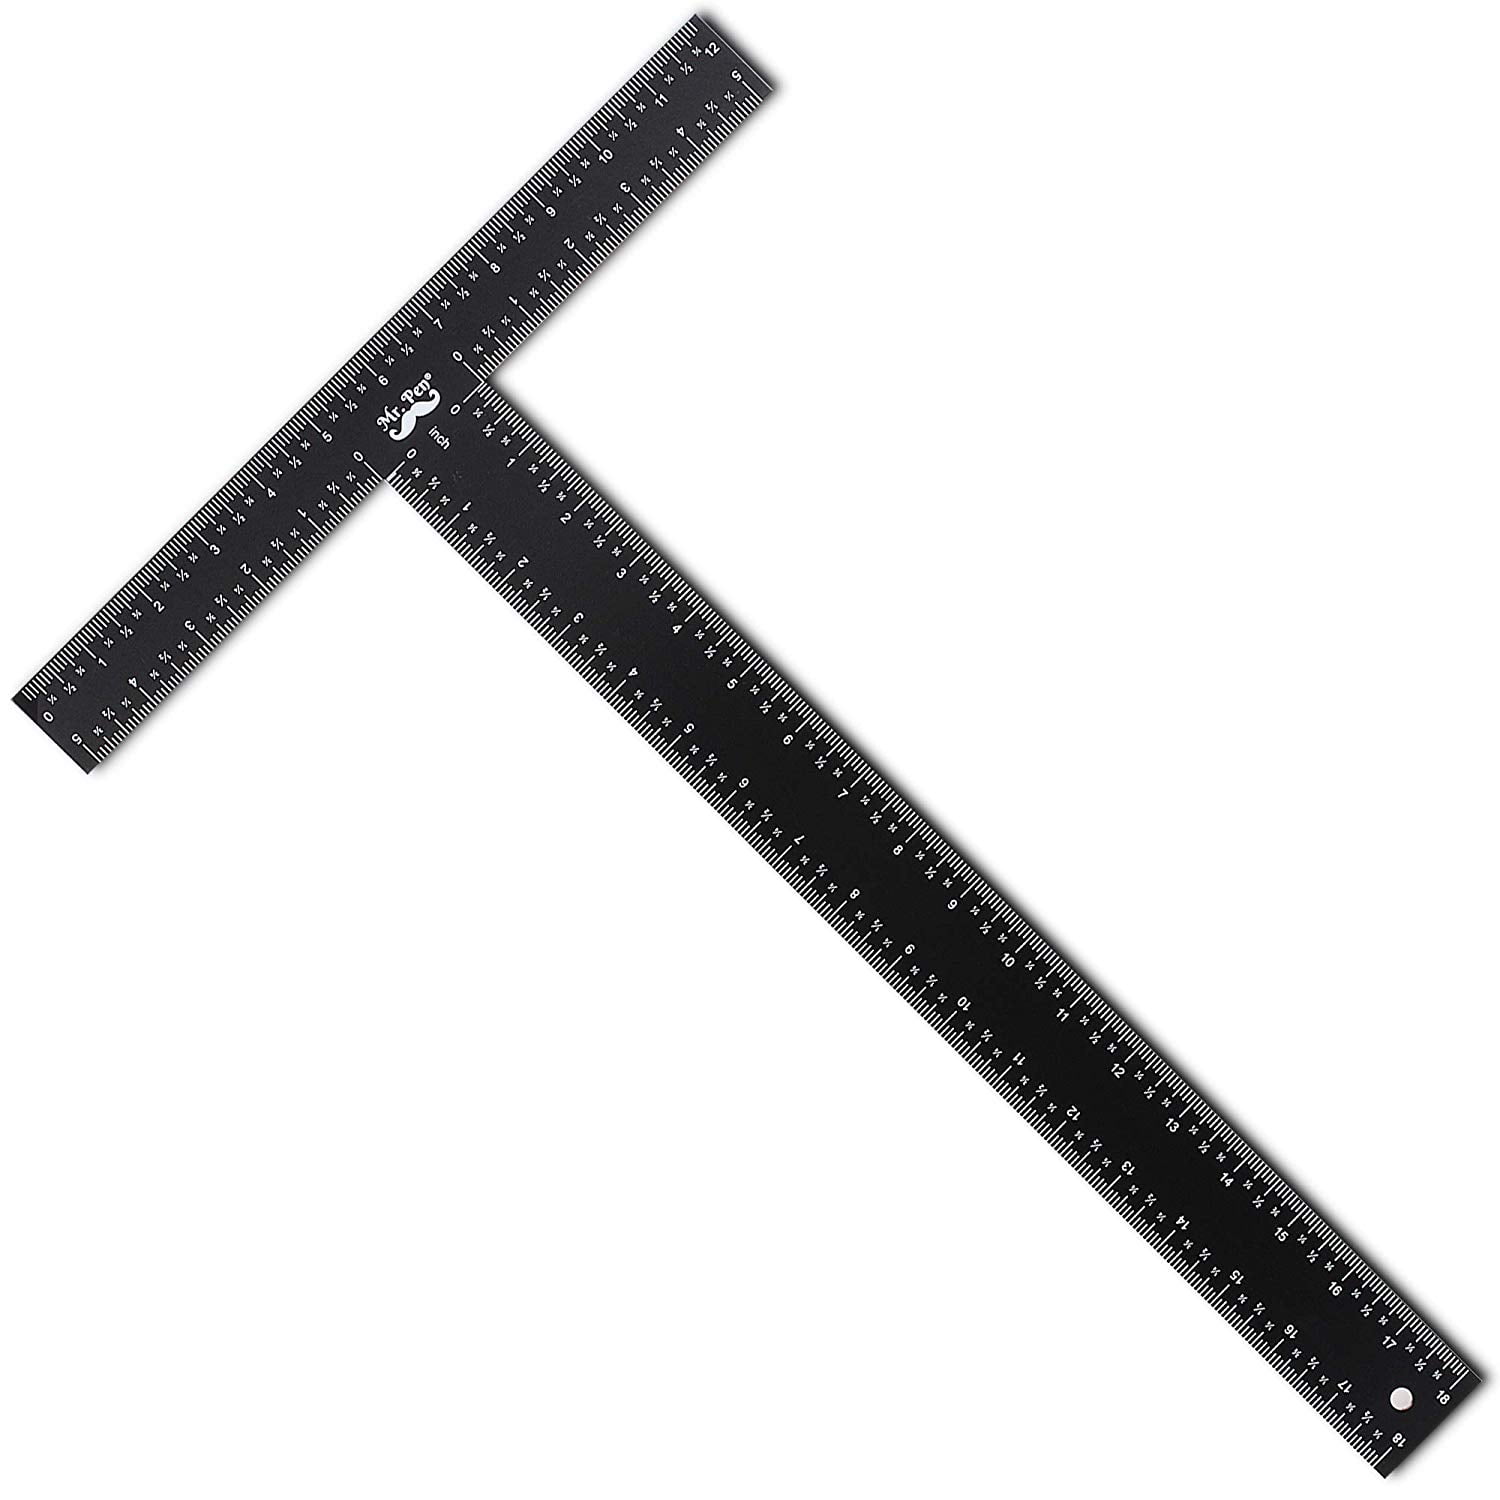 NUOBESTY 2 PCS 30cm T Square T Ruler T Square Ruler Drafting Ruler Tools for Drafting DIY Craft General Layout Work 